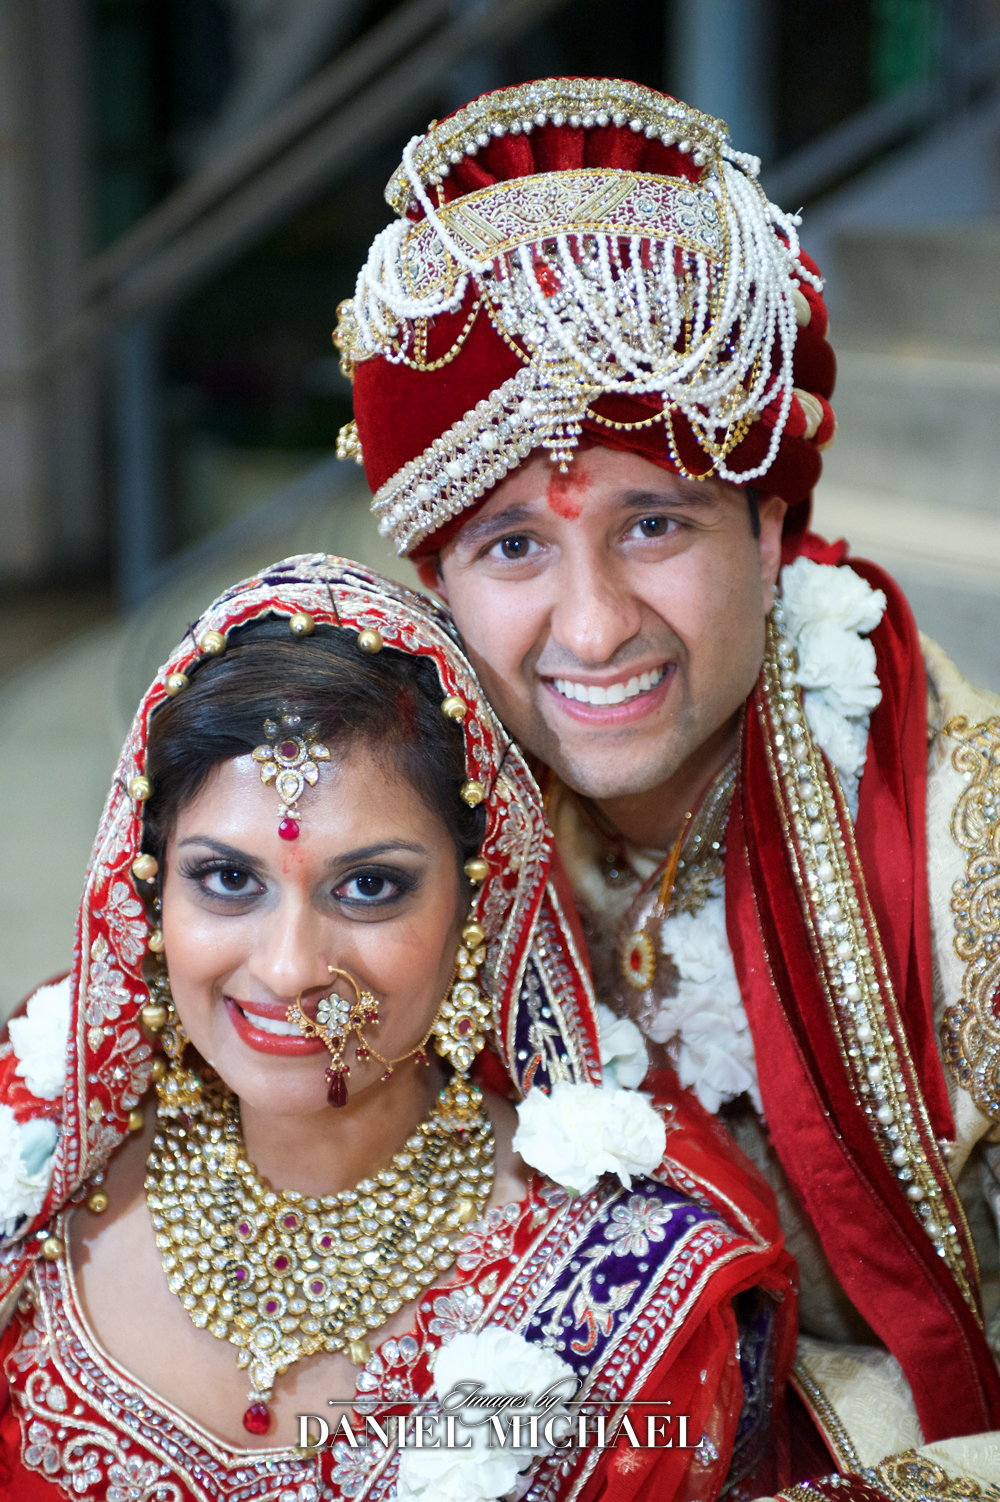 South Asian bride and groom in traditional Hindu wedding attire, captured by a wedding photographer